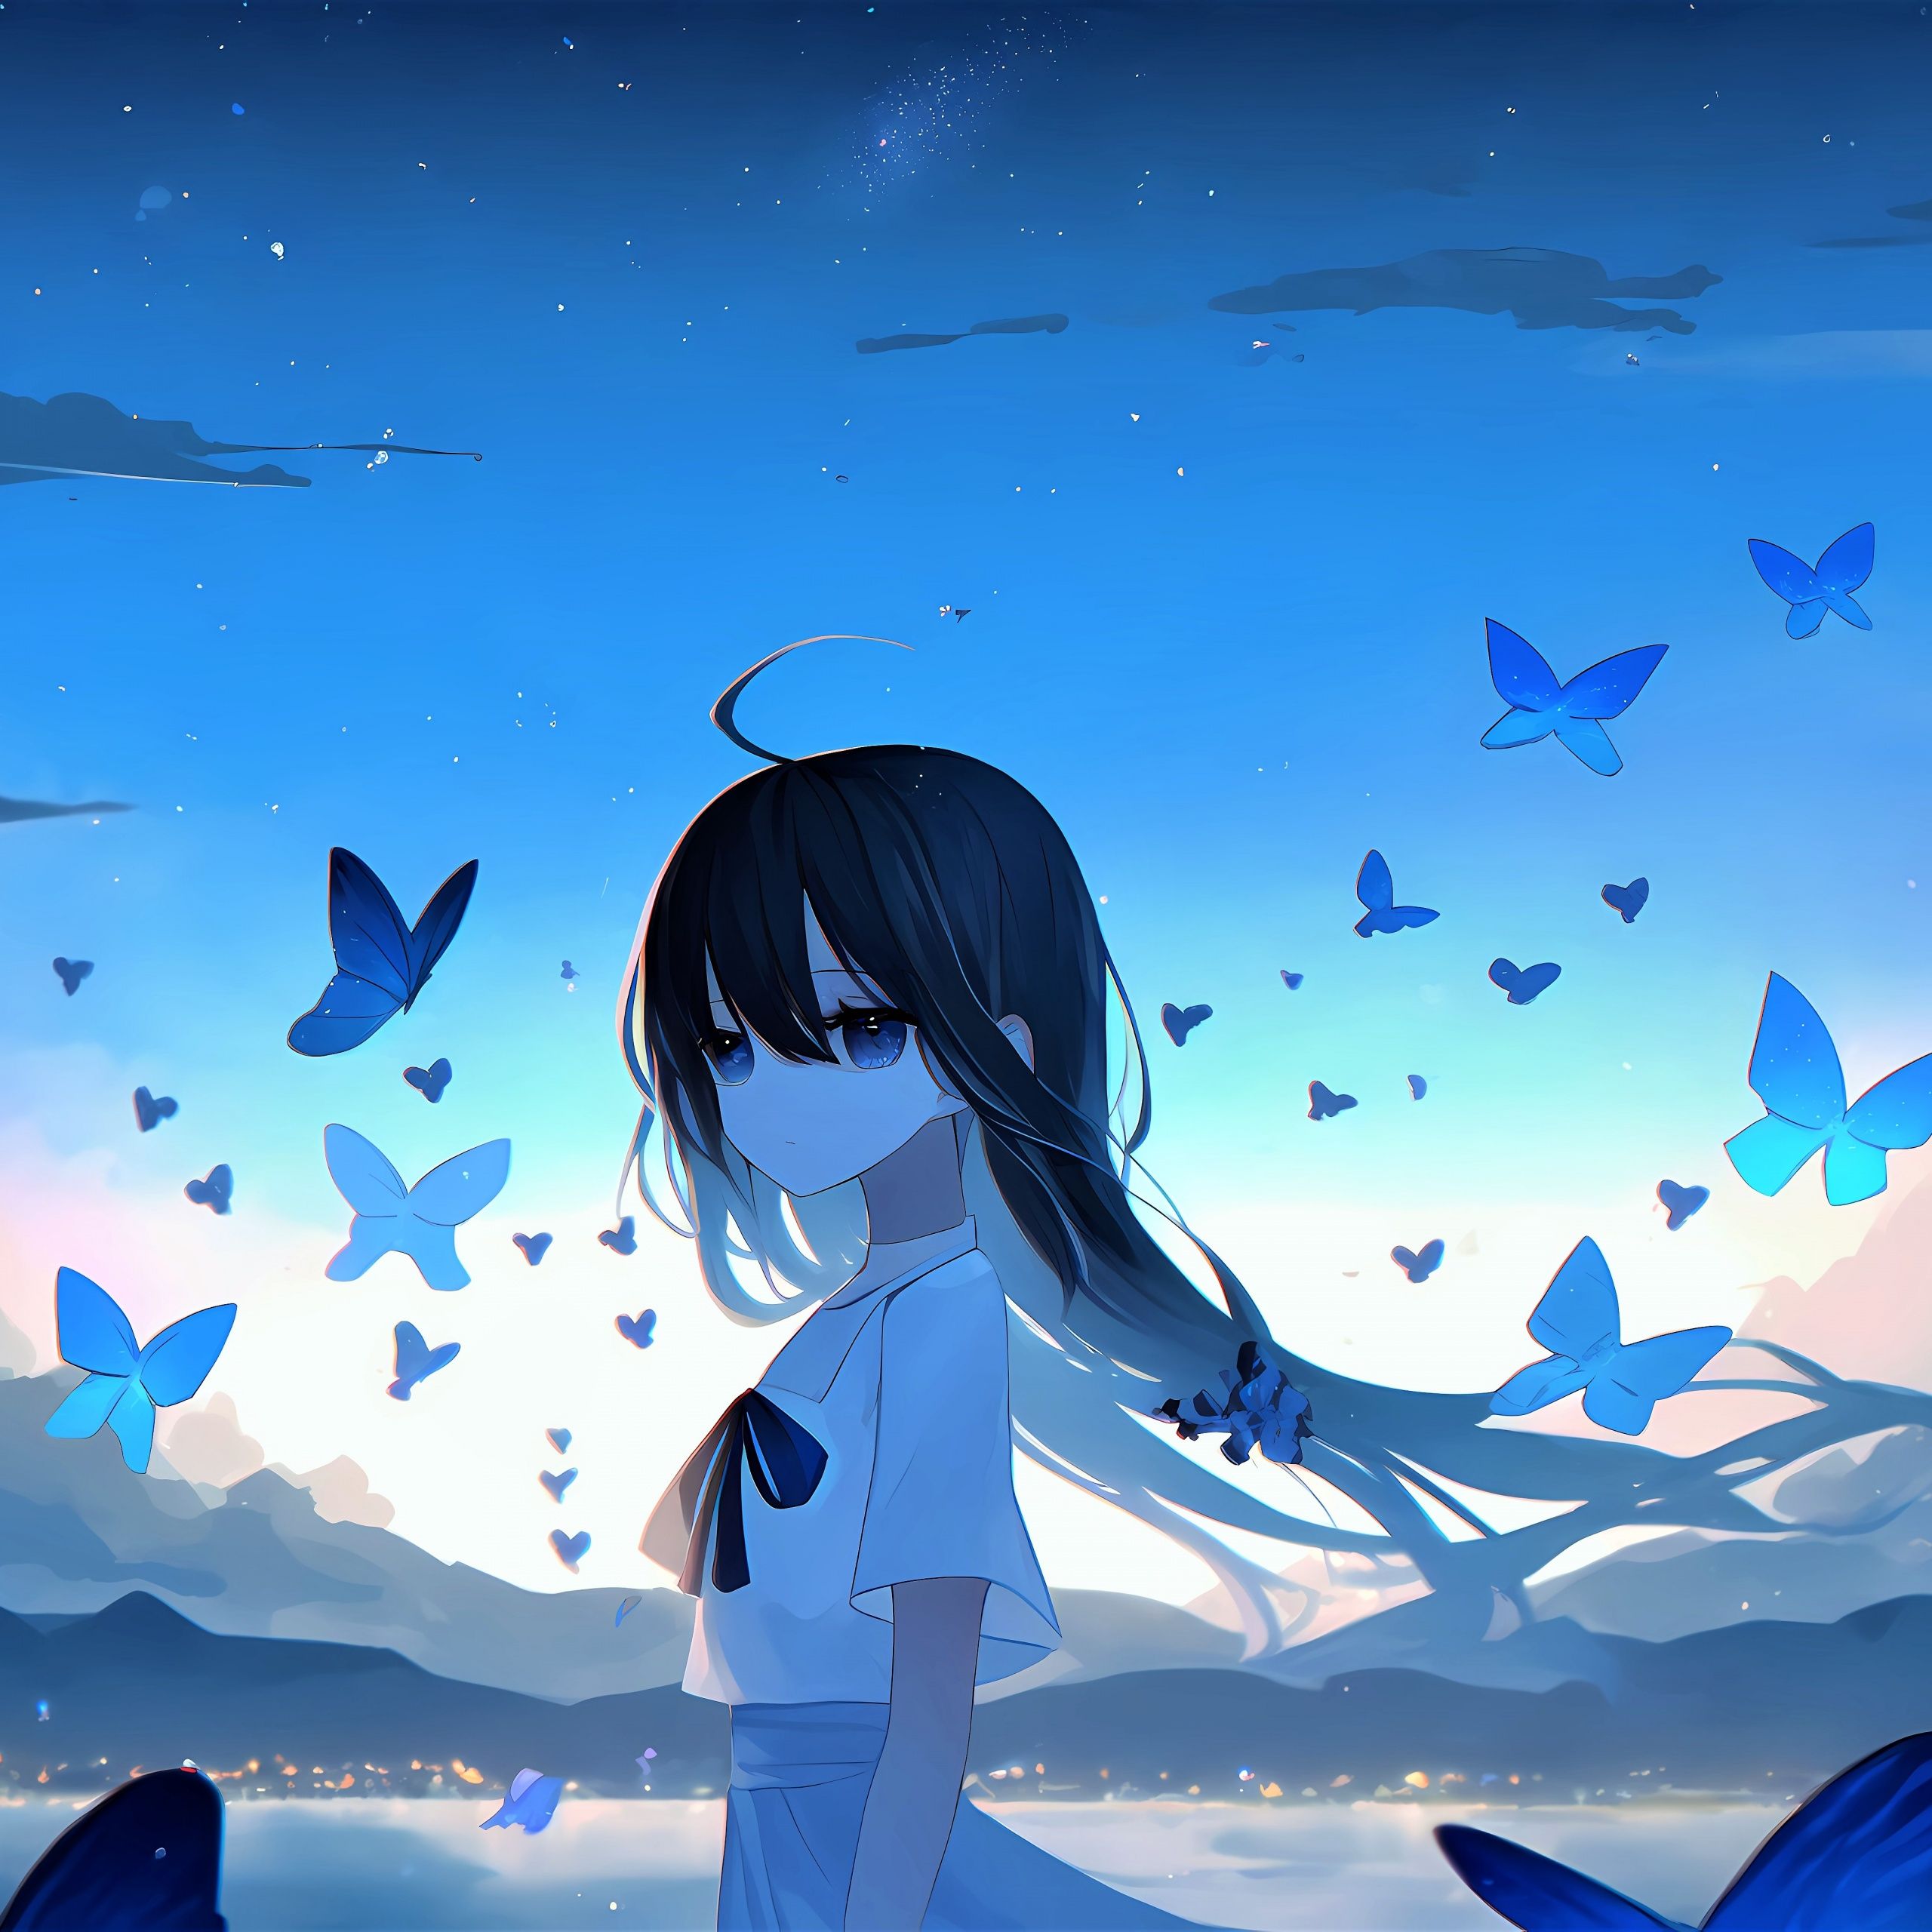 Anime girl with blue butterfly wallpaper, anime girl with blue butterfly wallpaper, anime girl with blue butterfly wallpaper, anime girl with blue butterfly wallpaper, anime girl with blue butterfly wallpaper, anime girl with blue butterfly wallpaper, anime girl with blue butterfly wallpaper, anime girl with blue butterfly wallpaper, anime girl with blue butterfly wallpaper, anime girl with blue butterfly wallpaper, anime girl with blue butterfly wallpaper, anime girl with blue butterfly wallpaper, anime girl with blue butterfly wallpaper, anime girl with blue butterfly wallpaper, anime girl with blue butterfly wallpaper, anime girl with blue butterfly wallpaper, anime girl with blue butterfly wallpaper, anime girl with blue butterfly wallpaper - Anime girl